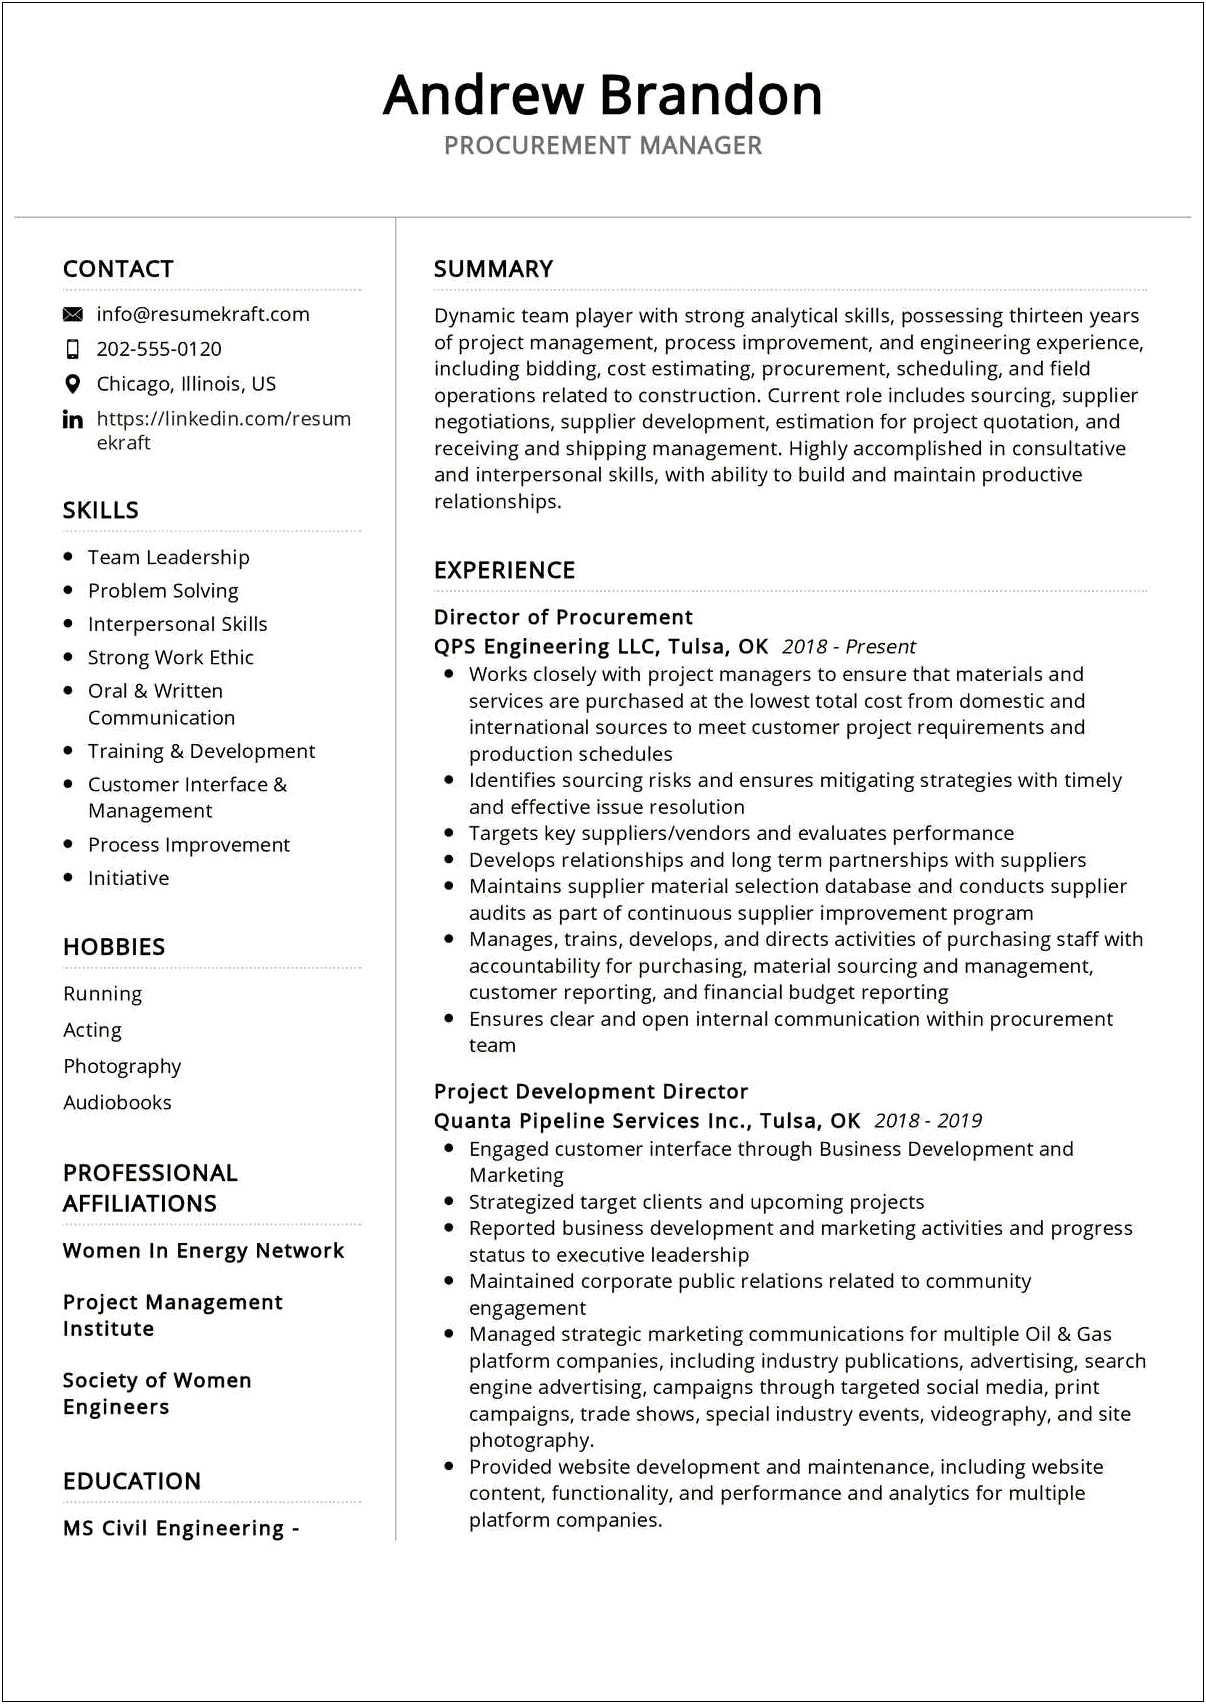 Examples Of Professional Resume For Procurement Managers